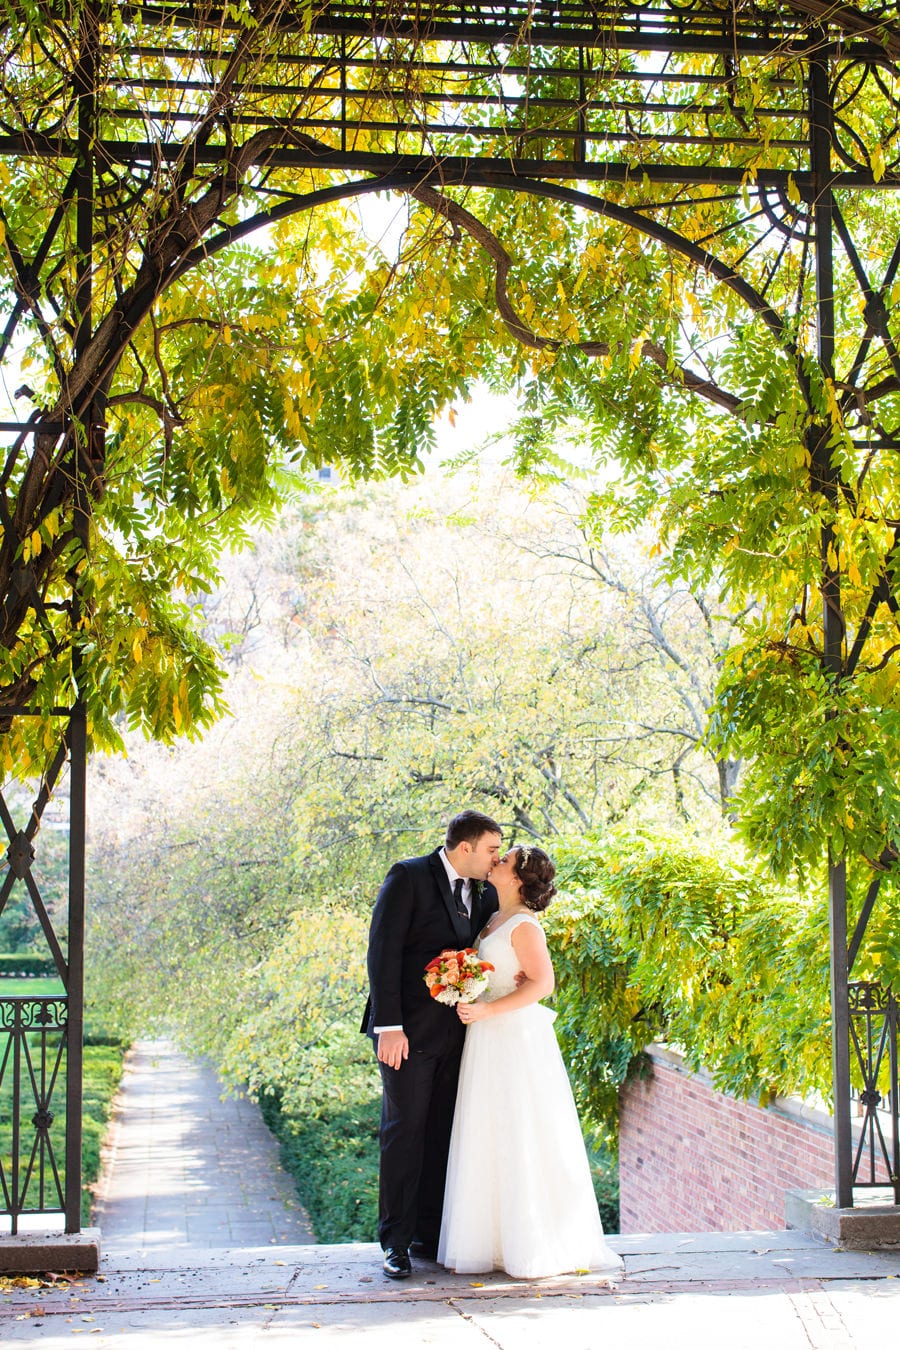 043-central-park-nyc-wedding-photography